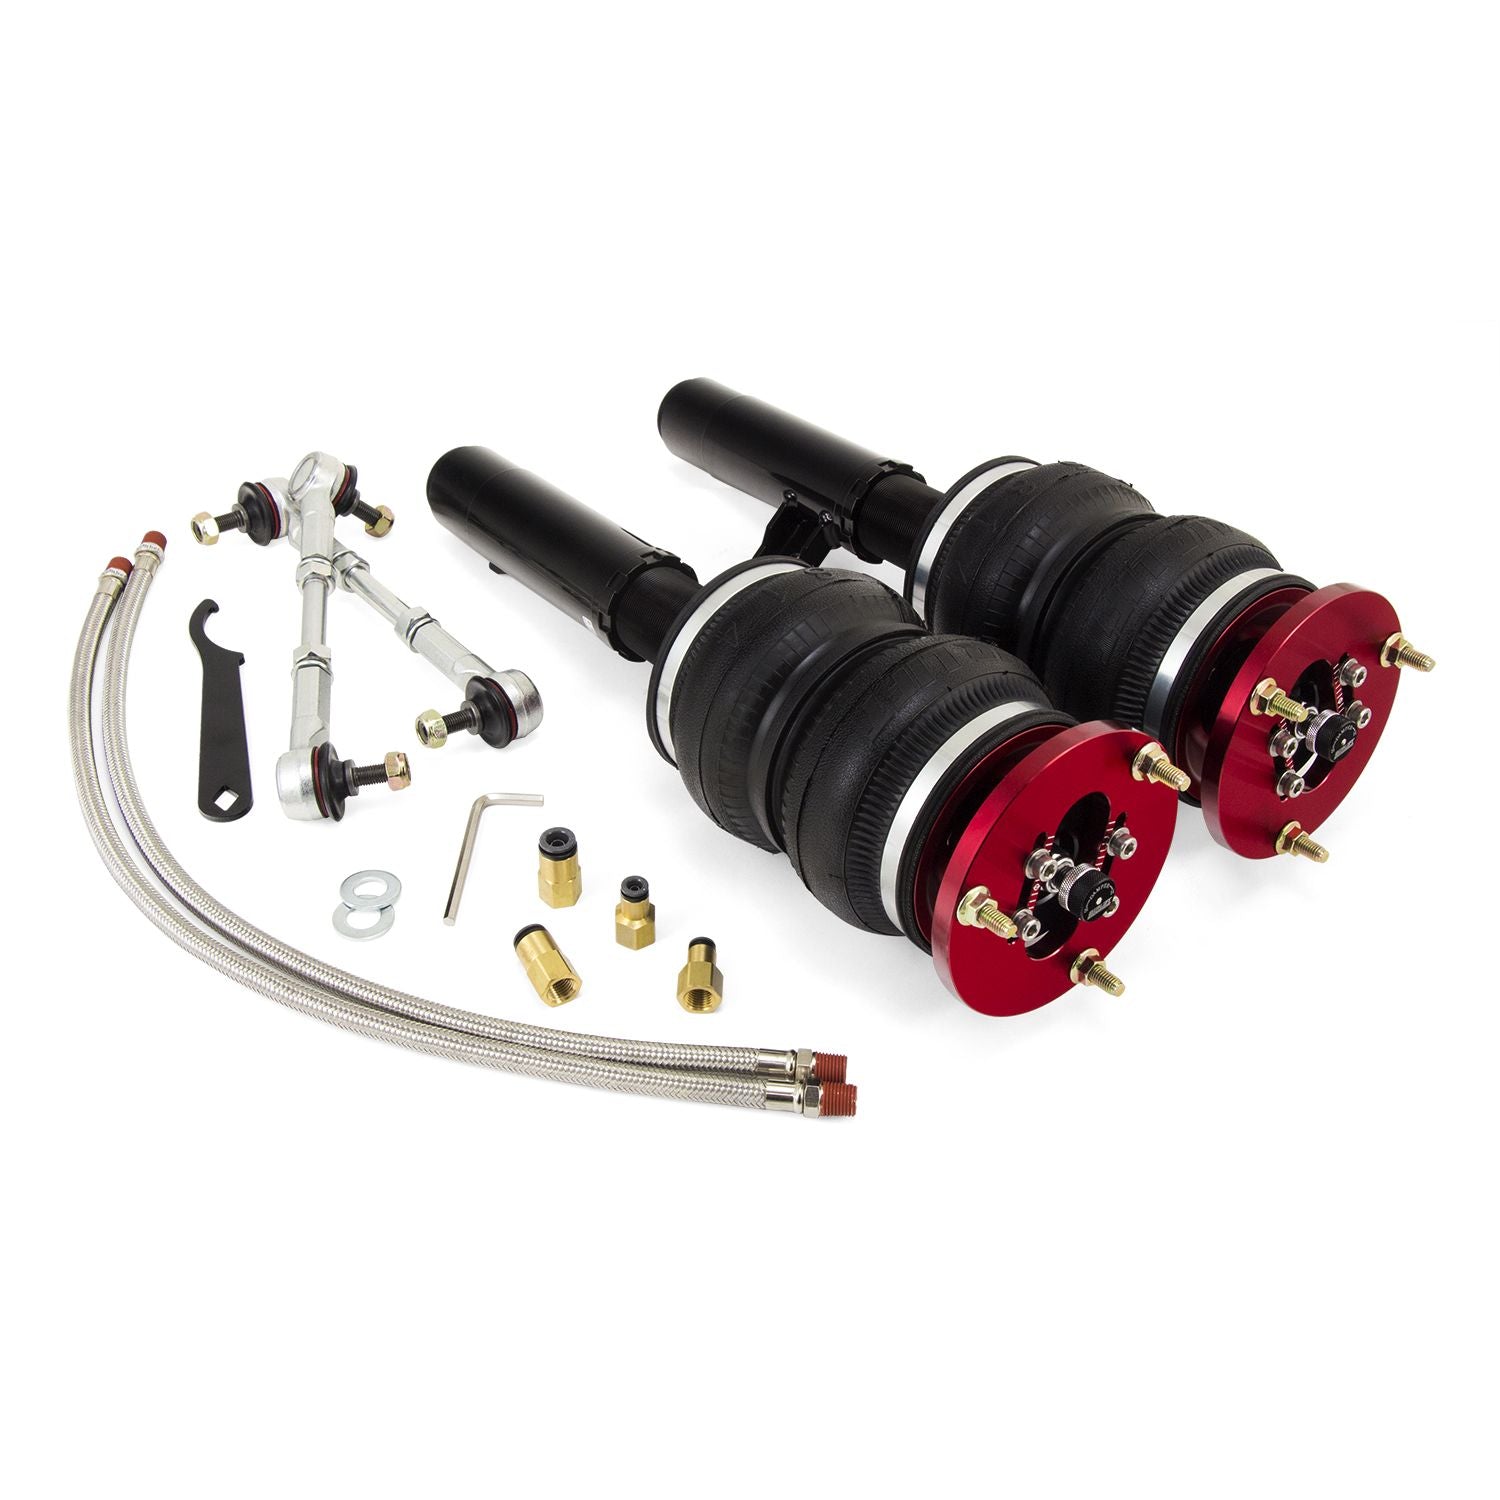 It's time to revolutionize your BMW E8X/E9X experience and begin your #lifeonair with Air Lift Performance! Our air spring suspension will get you the maximum drop as well as superior handling and a comfortable ride.